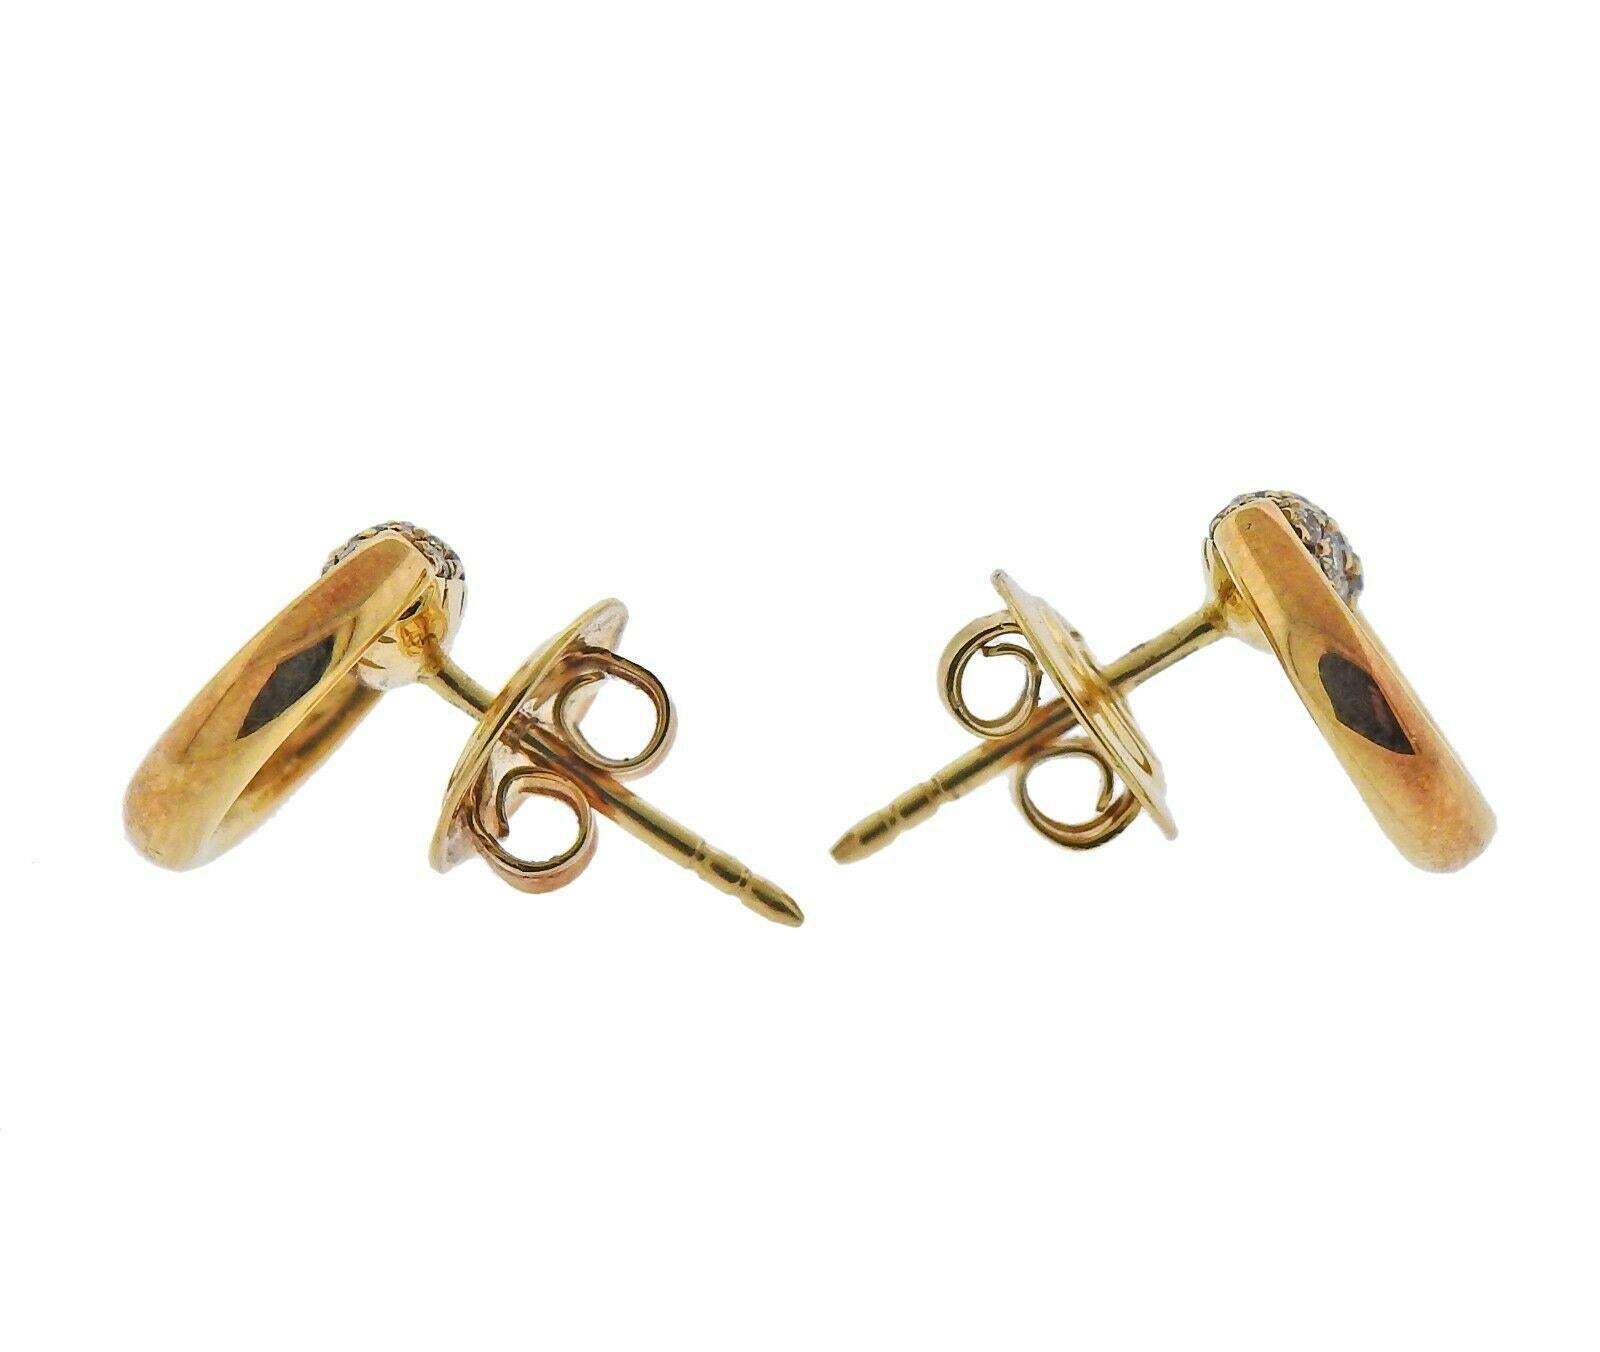 New 18k yellow gold pair of Horsebit stud earrings by Gucci, with approx. 0.30ctw in G/VS diamonds. Retail $1700, come with box/papers. Earrings are 10.5mm x 10mm, weight - 4.1 grams. Marked: Gucci, 750, Italy.